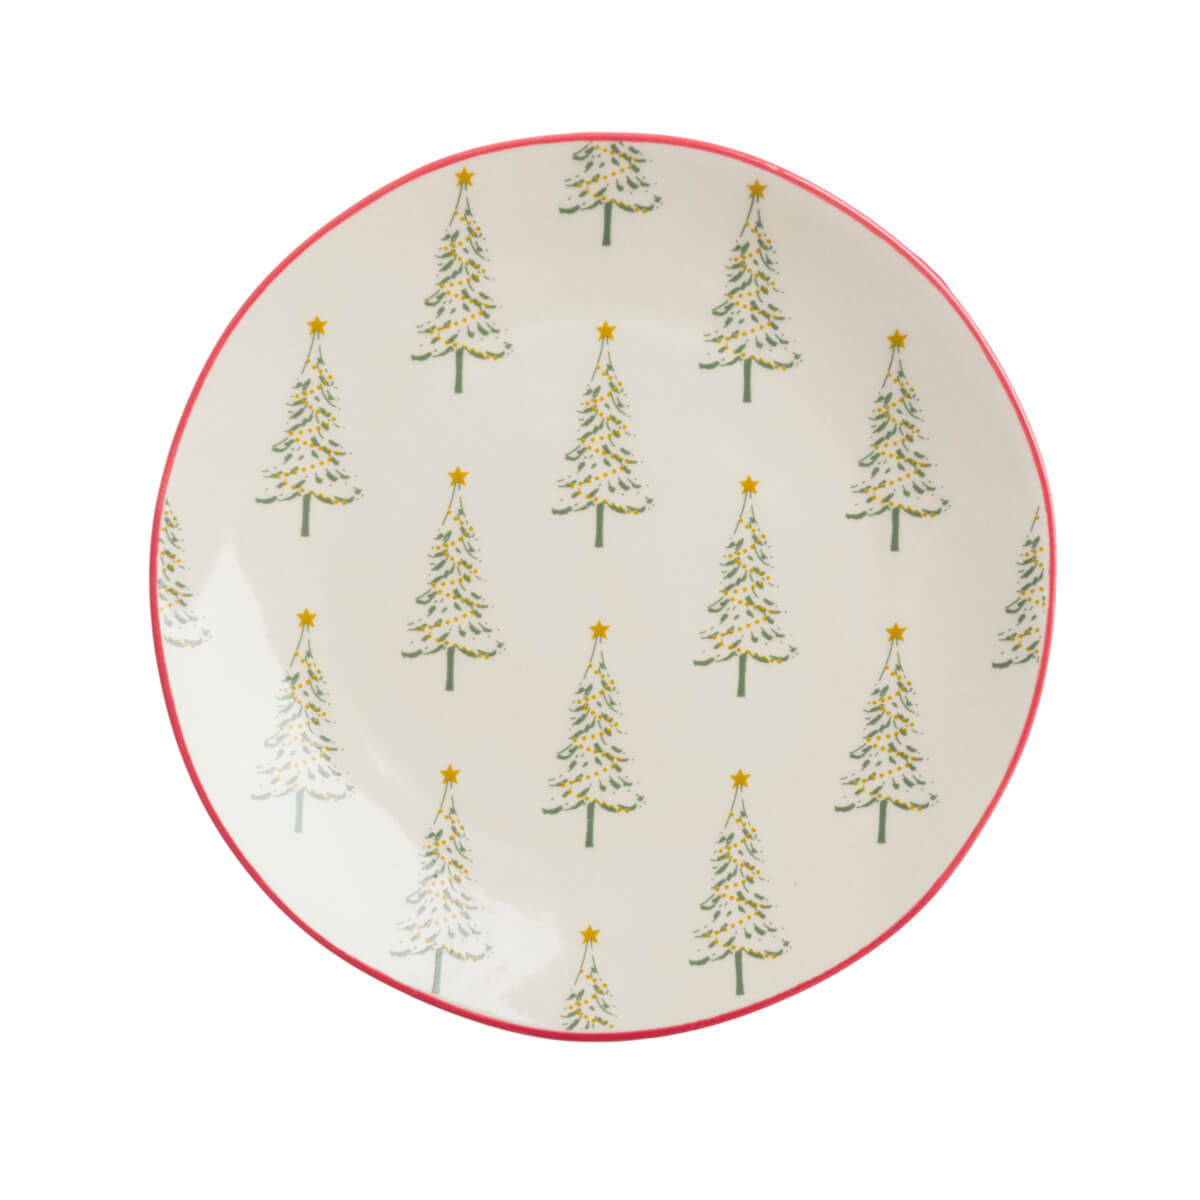 Christmas Tree Stoneware Side Plate by Sophie Allport